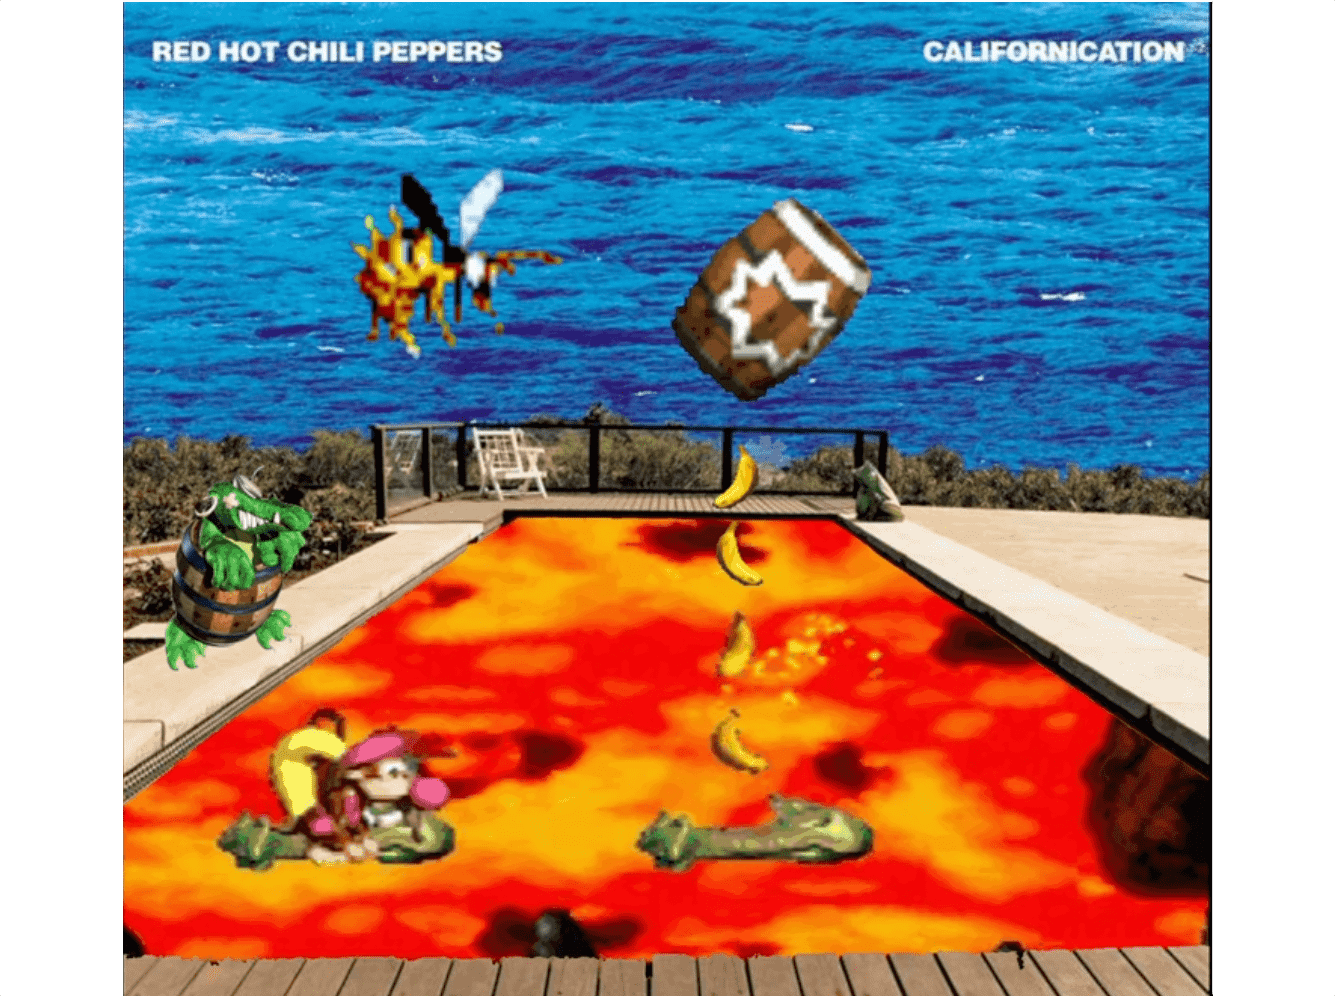 RHCP: Californication but with the Donkey Kong Country 2 Soundfont